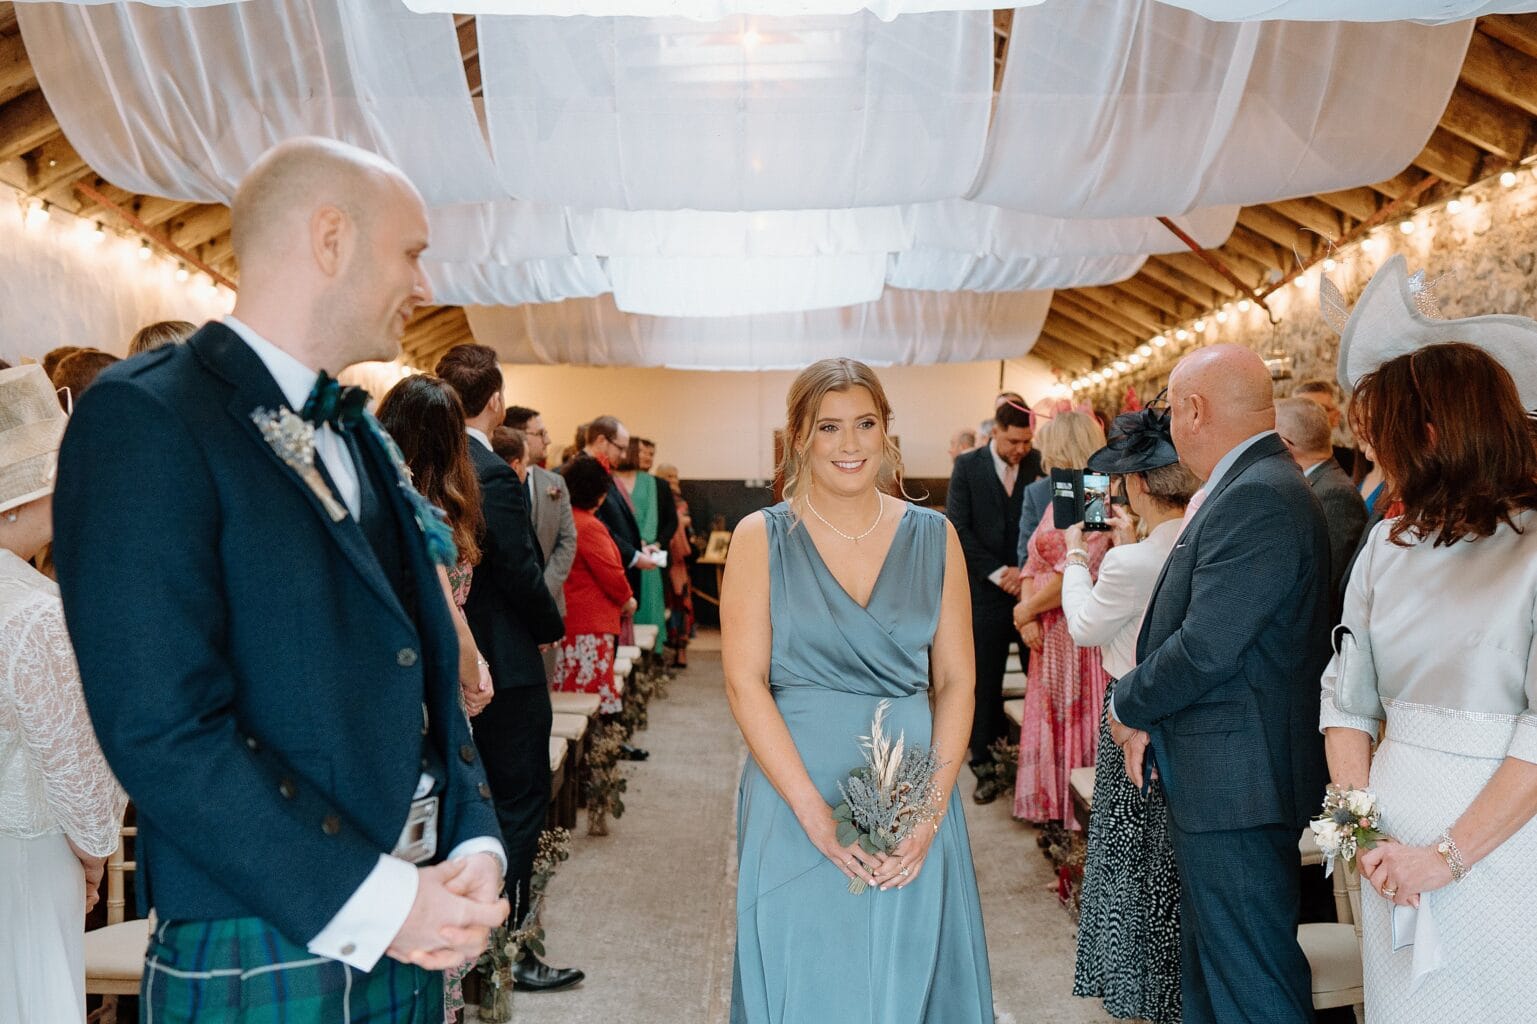 a bridesmaid in a blue dress walks up the aisle as guests look on underneath white drapes hanging from the ceiling in one of the best farm wedding venues in scotland